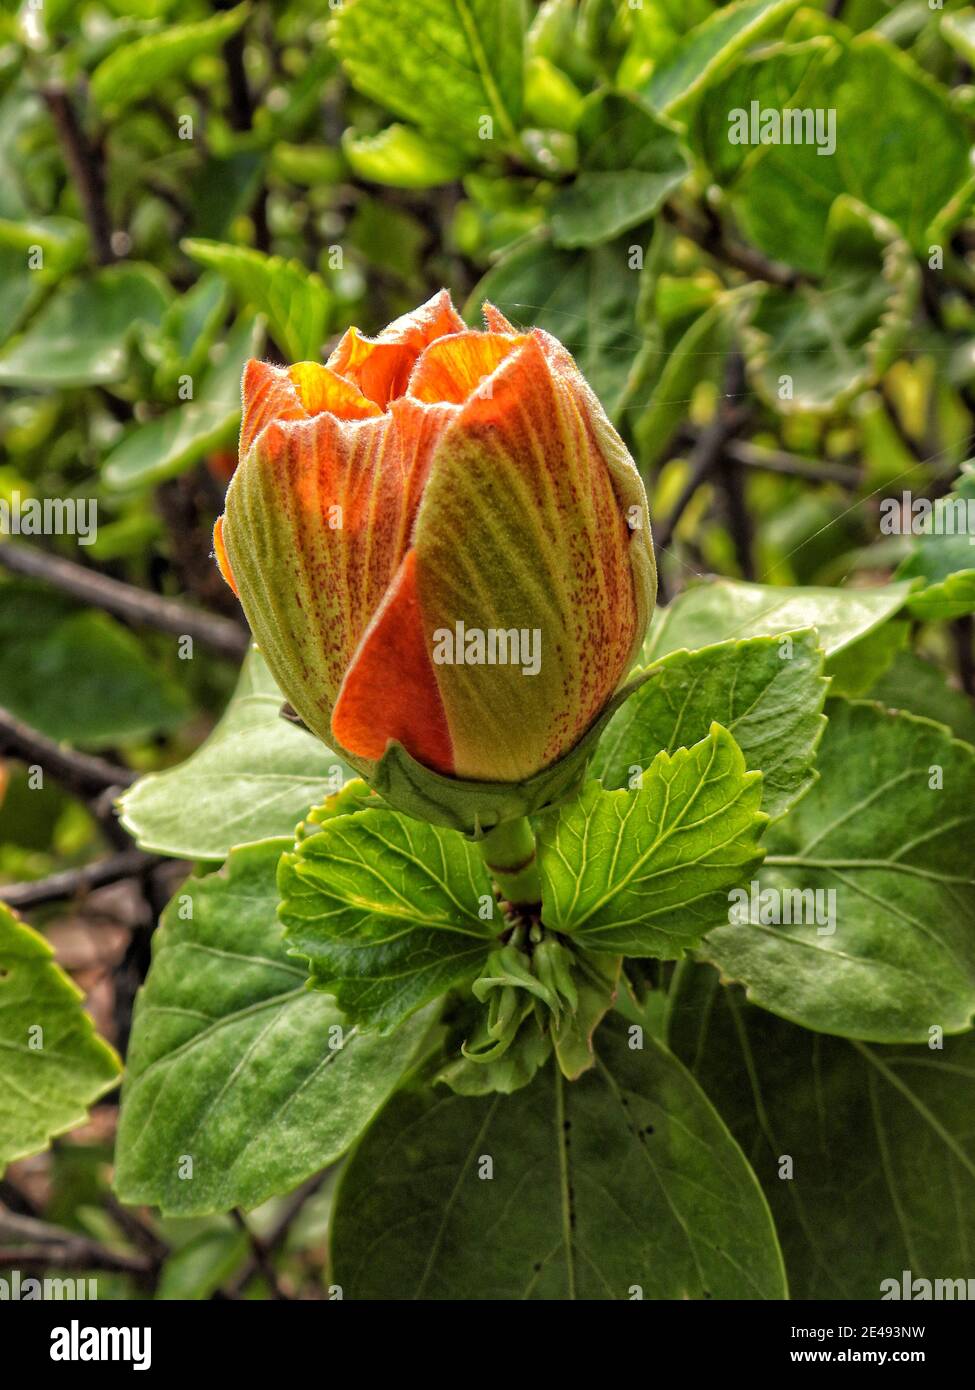 Bud of orange hibiscus flower in green foliage close up Stock Photo